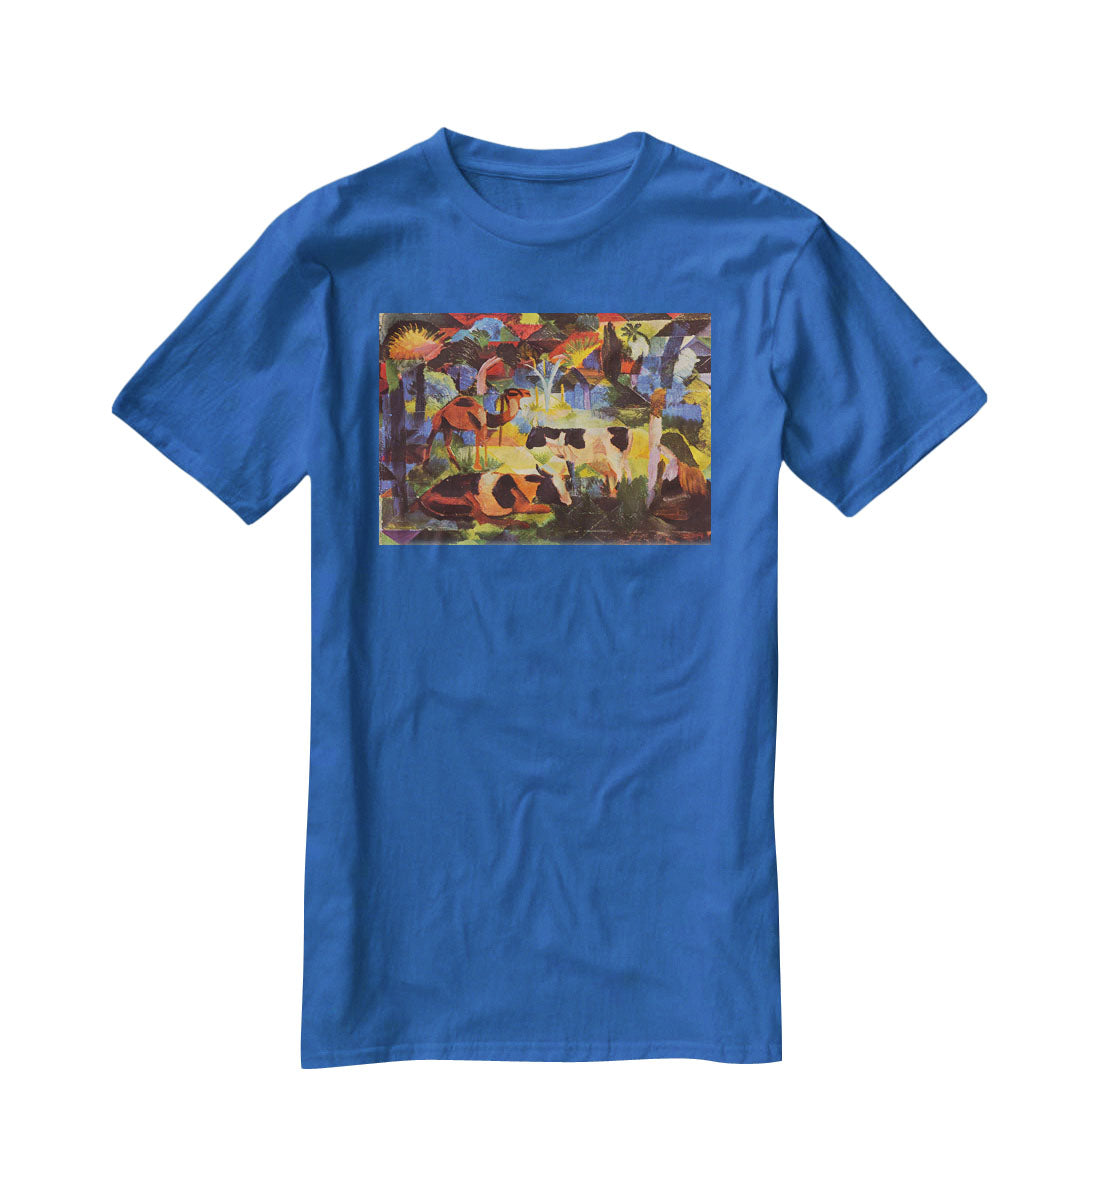 Landscape with cows and camels by Macke T-Shirt - Canvas Art Rocks - 2